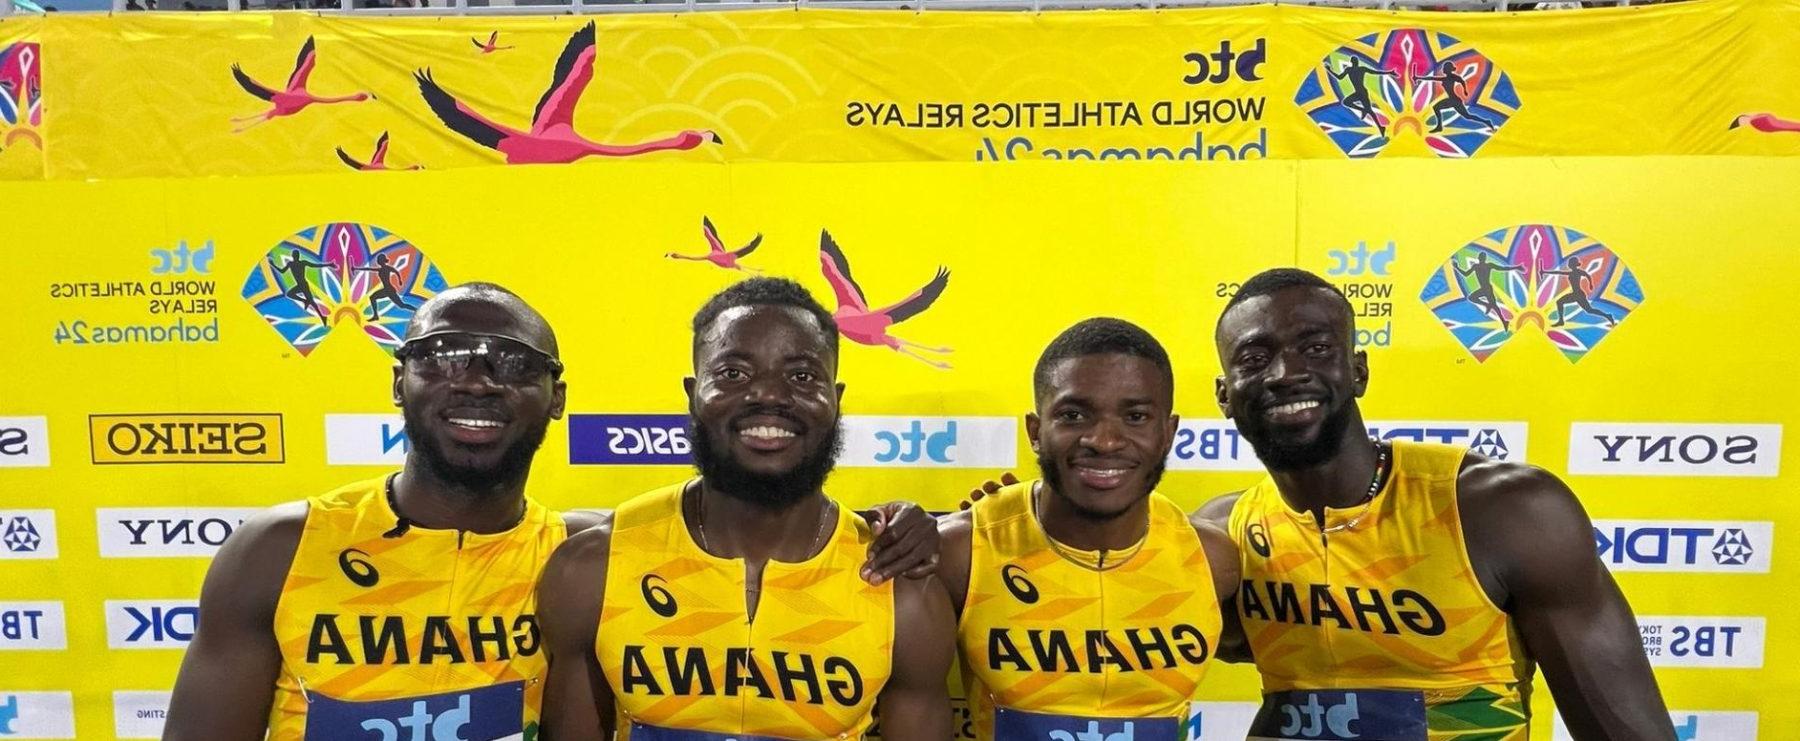 Four athletes pose before a yellow background, wearing their yellow Ghana jerseys and smiling with their arms around each other.